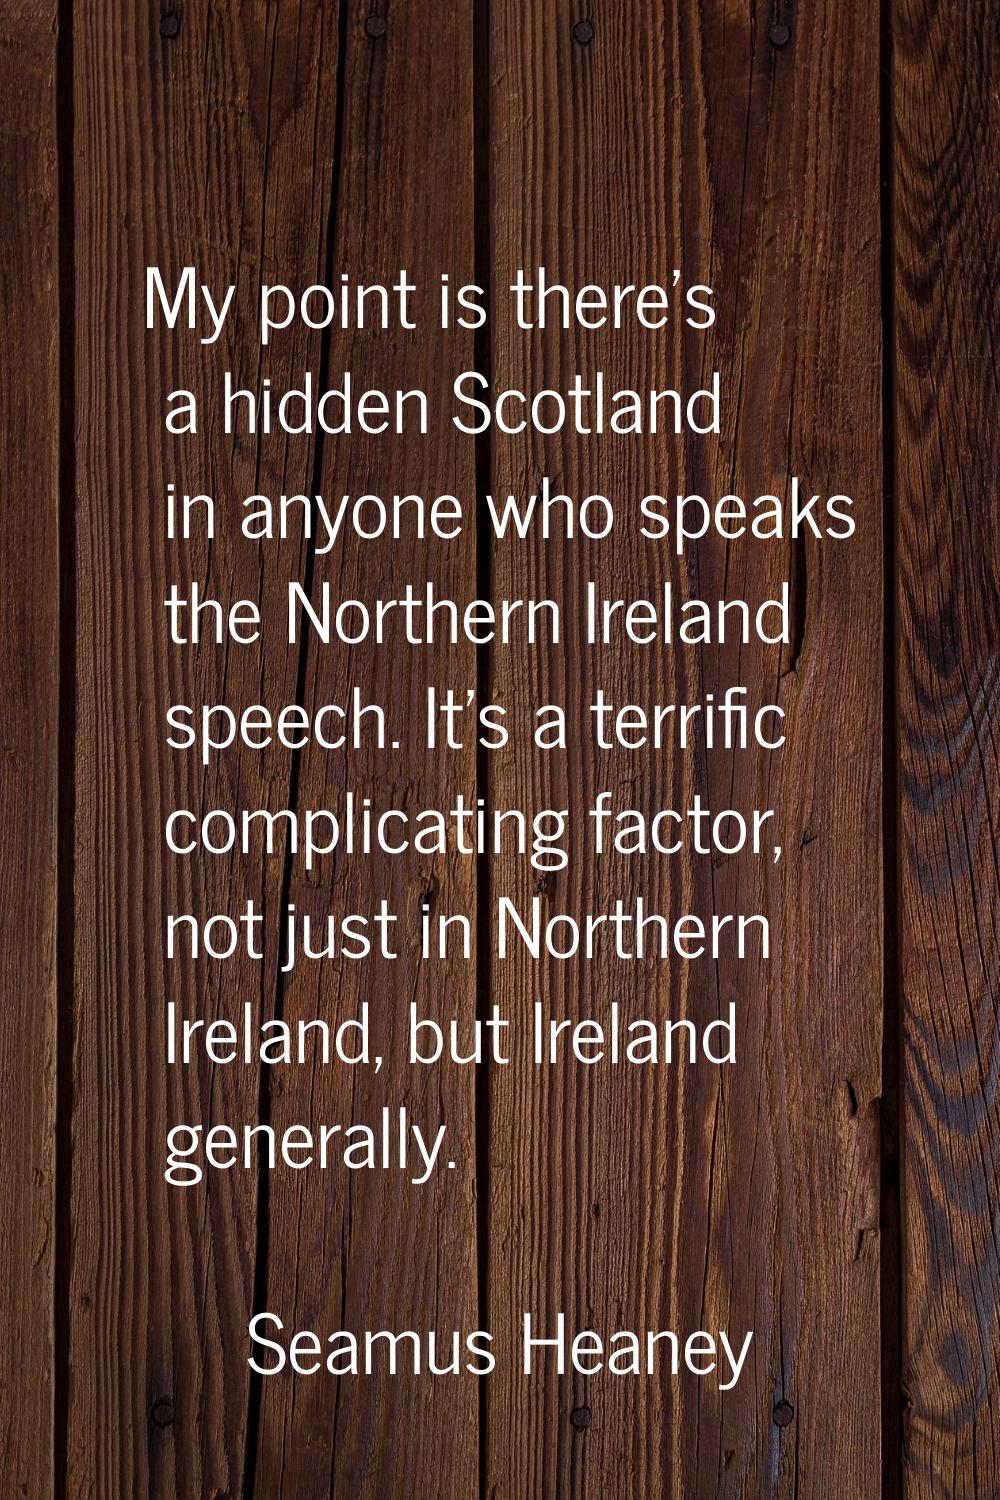 My point is there's a hidden Scotland in anyone who speaks the Northern Ireland speech. It's a terr